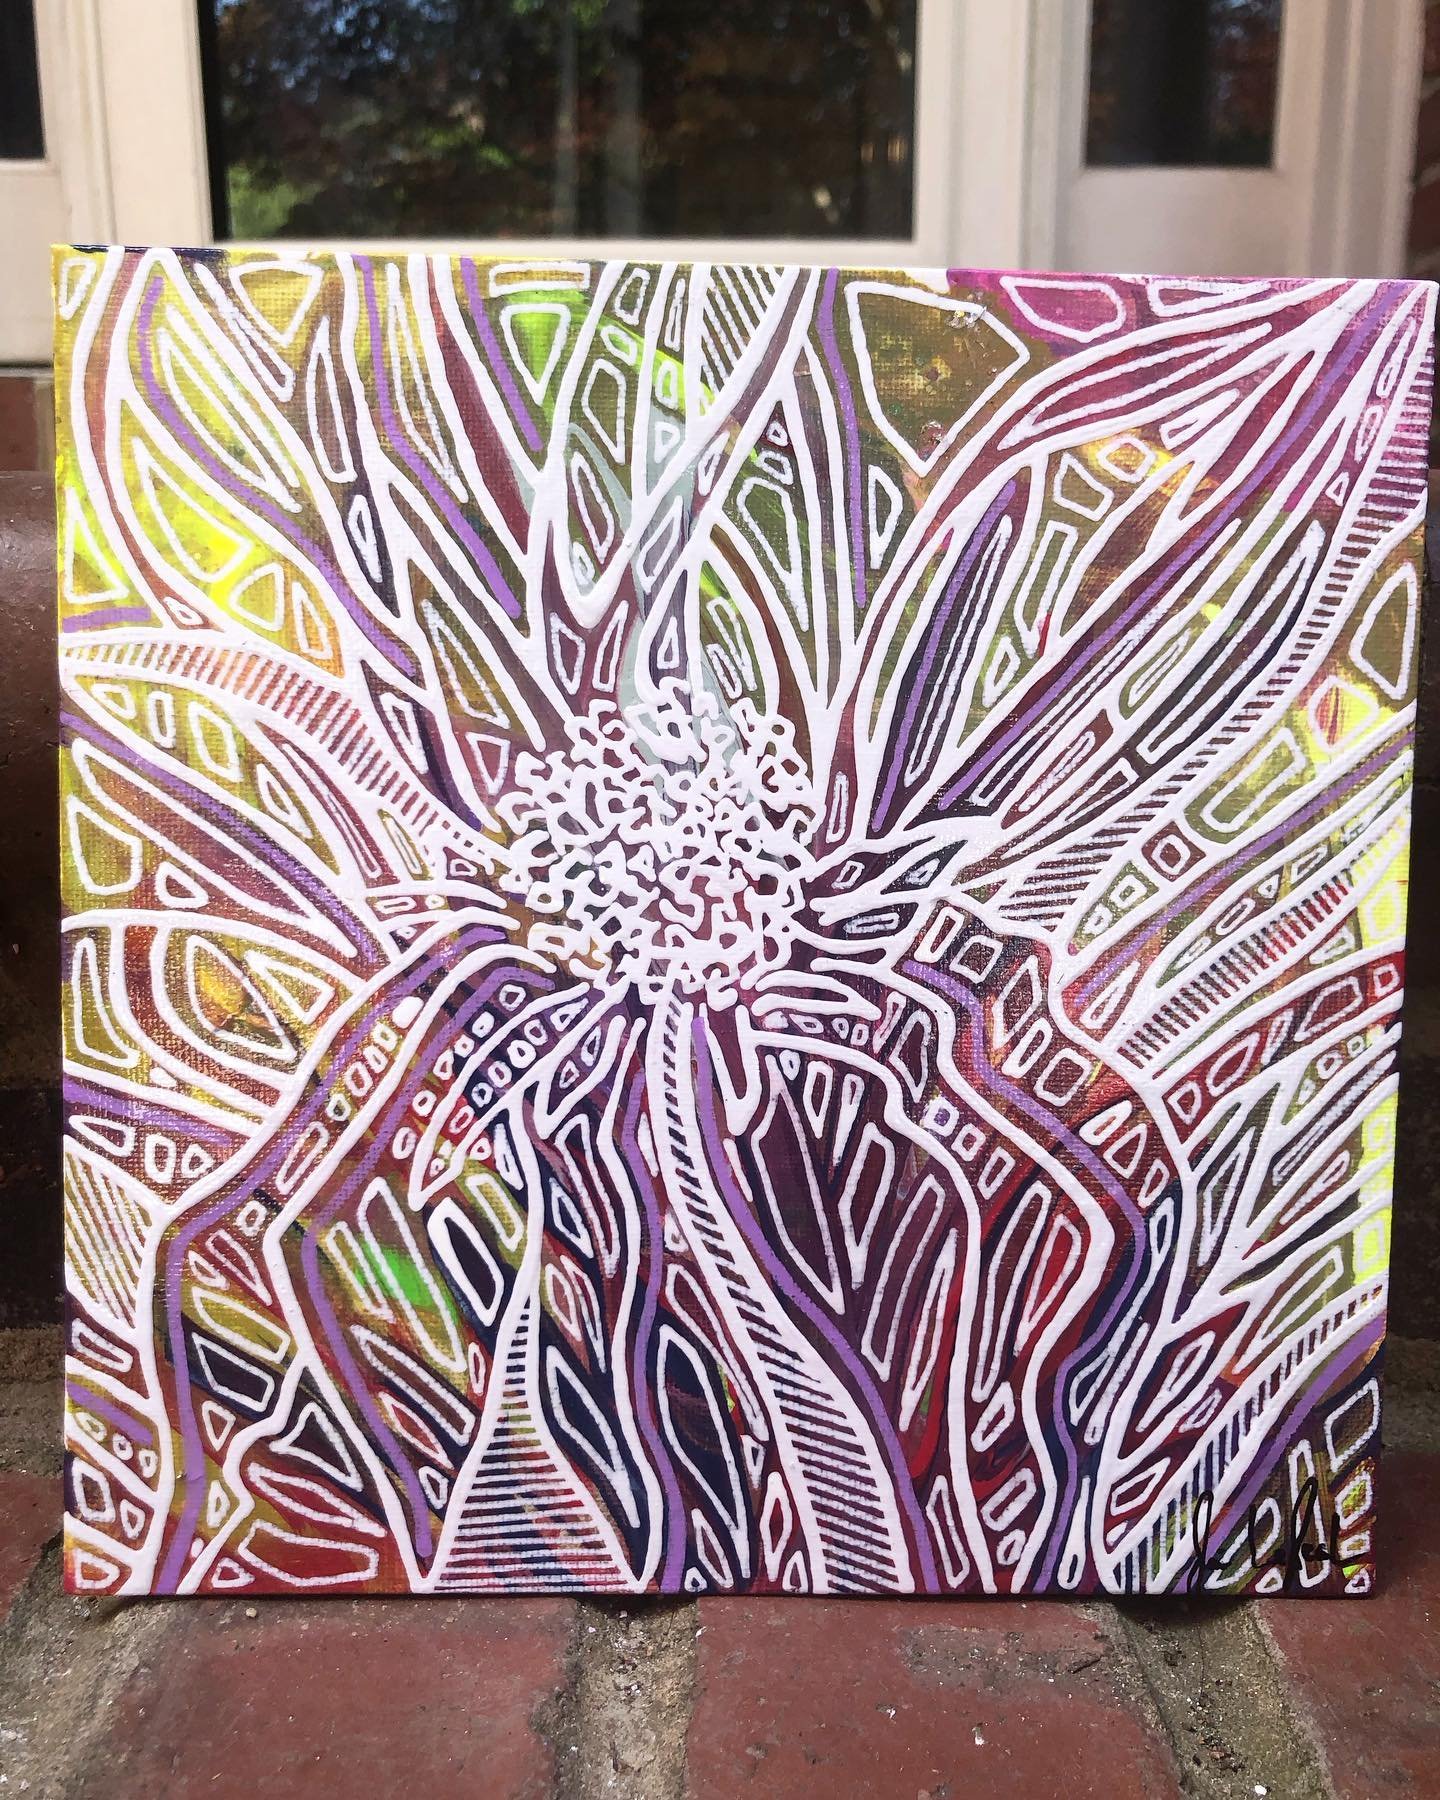 &ldquo;Fractal Flower&rdquo;
8x8

Fun little piece. Flowers are probably the only &ldquo;real&rdquo; thing I can draw that doesn&rsquo;t make me cringe 😊 

#jamielejealpaintings #abstract #abstractart #abstractartist #abstractartwork #abstractpainti